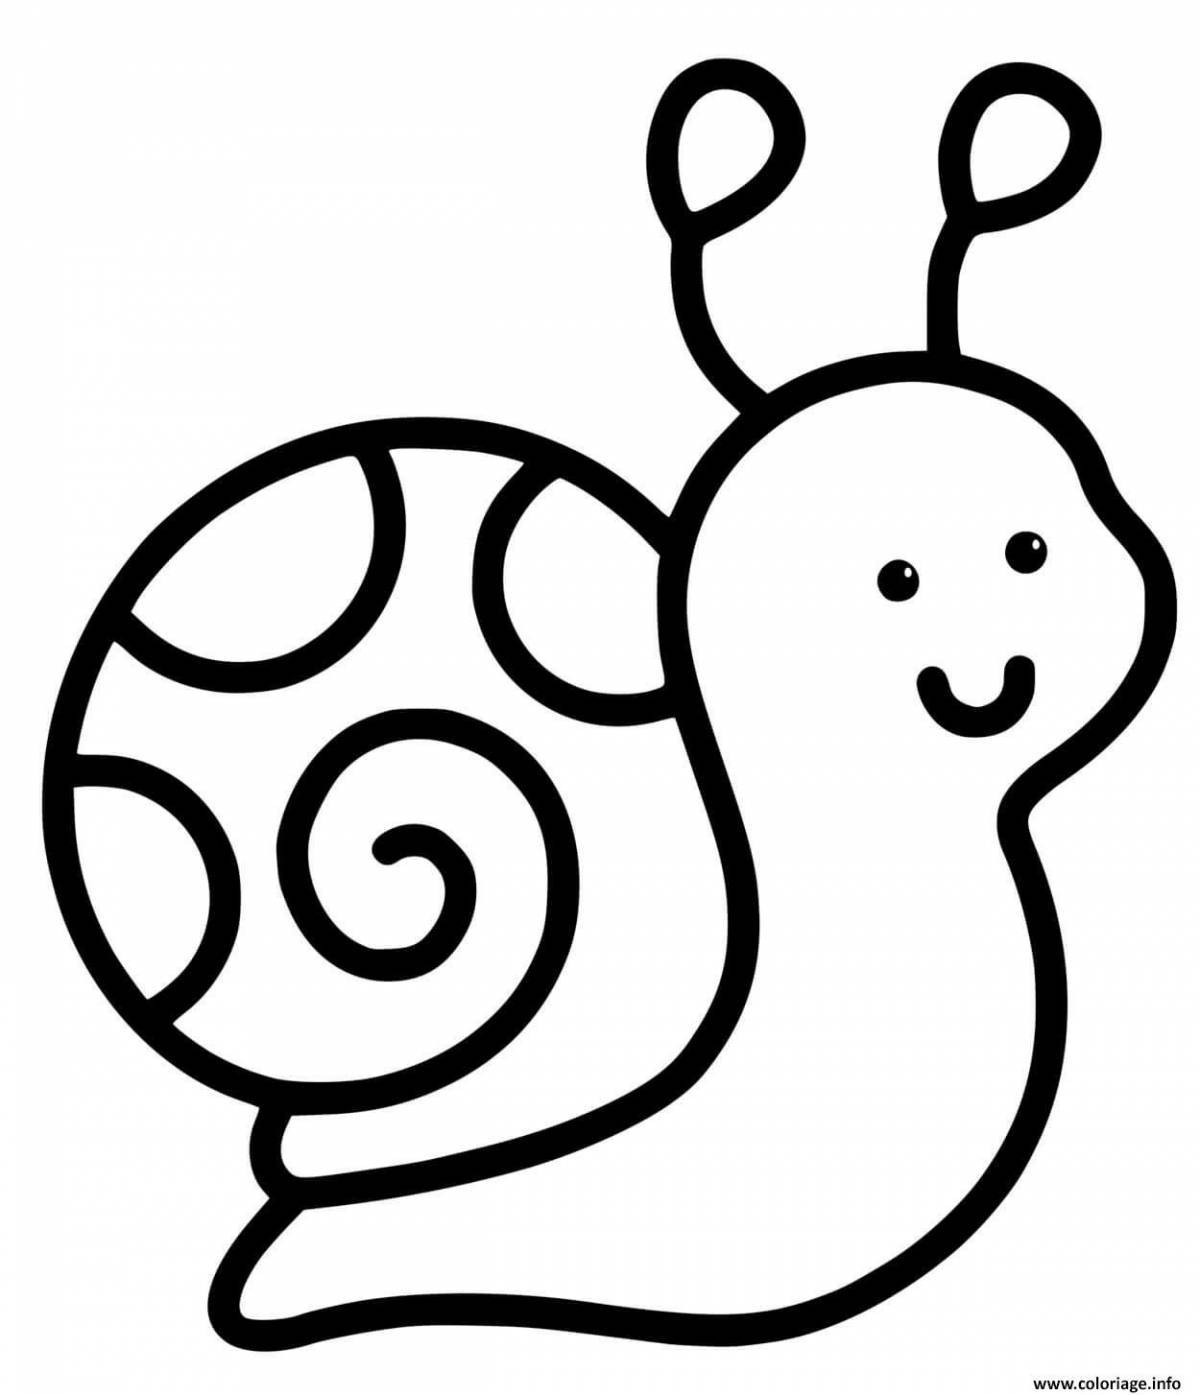 Playful snail coloring page for kids